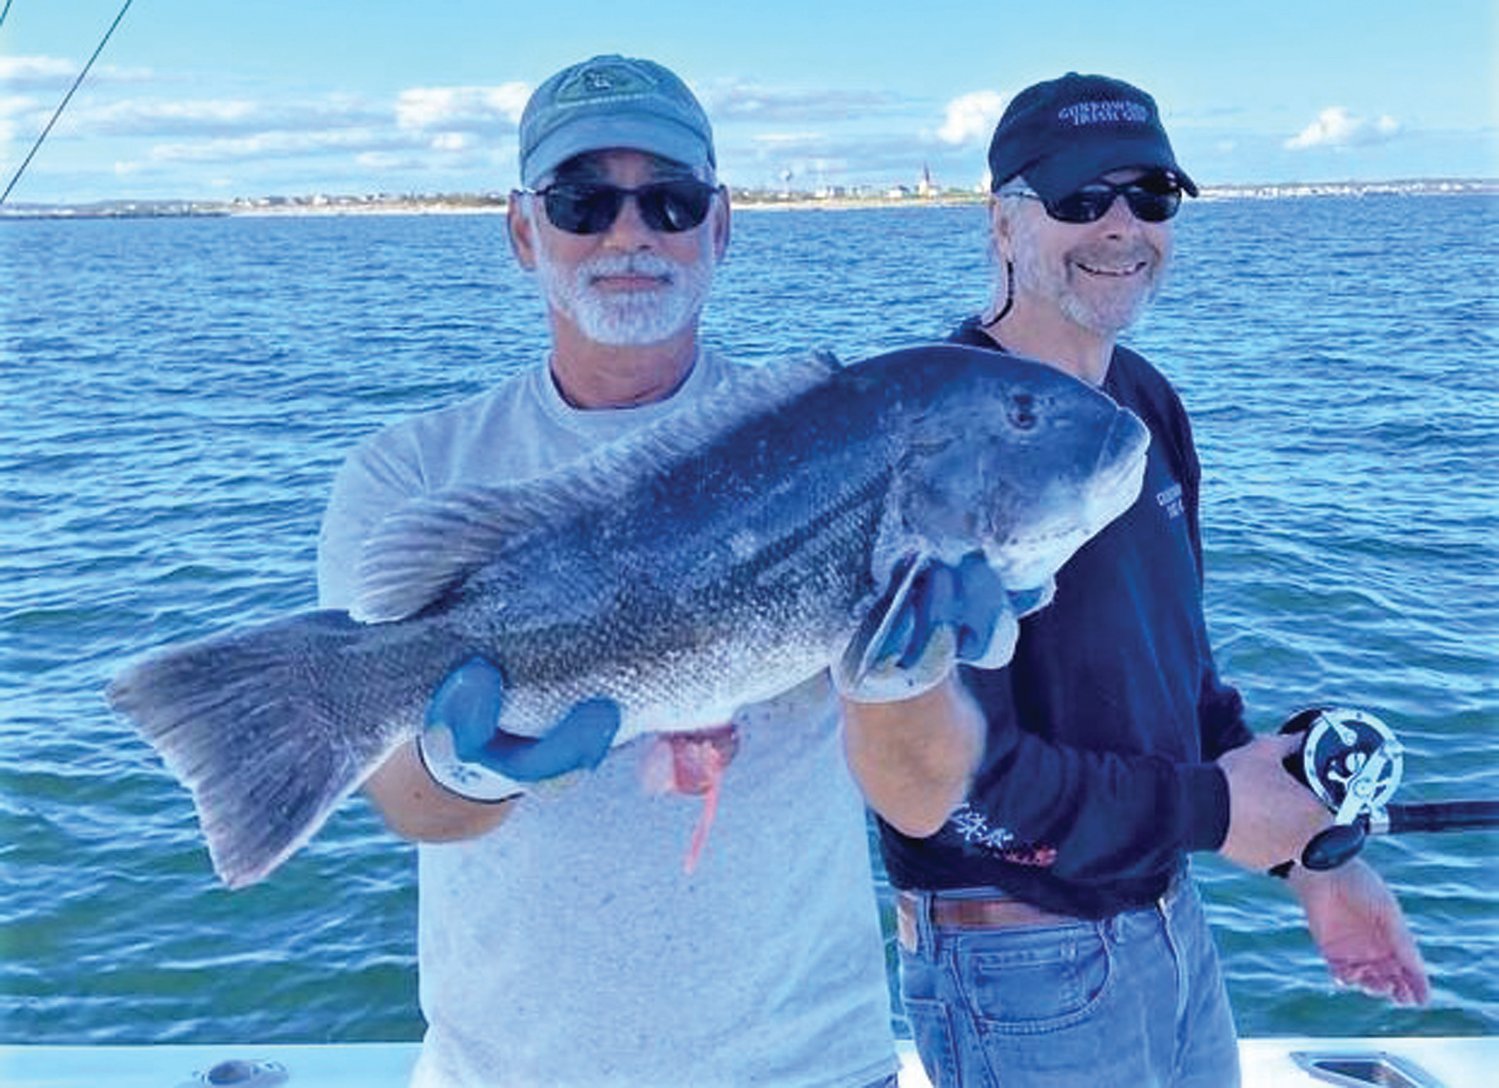 BIG CATCH: John Stavrakas of South Kingstown with the 22-inch, seven-pound tautog he caught off Pt. Judith last week with his friend John Jeffries of Fort Salonga, NY.